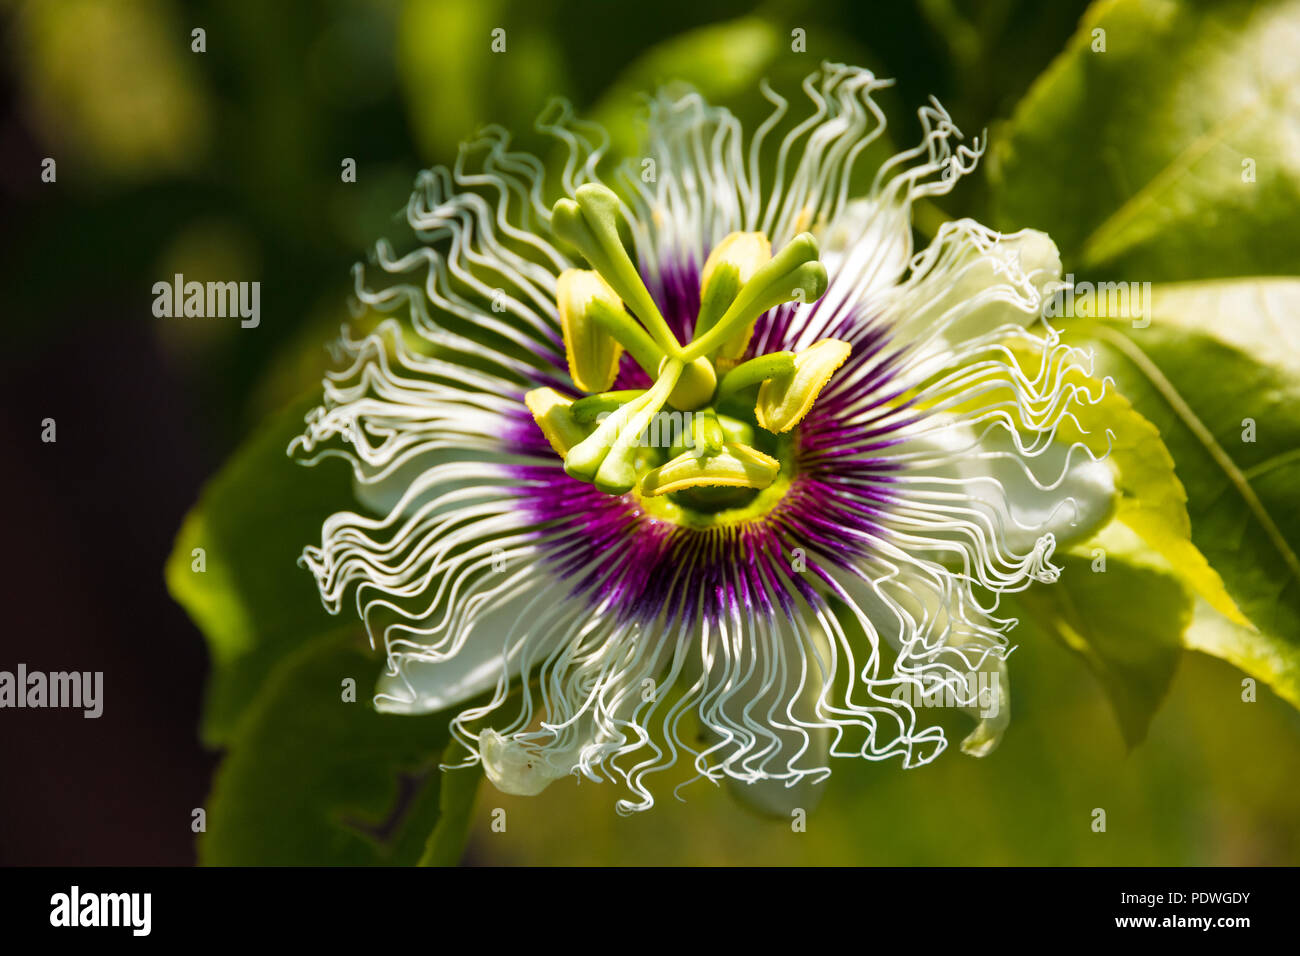 Great close up view of a gorgeous passion flower (Passiflora edulis) with a corona that is composed of thin, purple colored filaments that radiate... Stock Photo